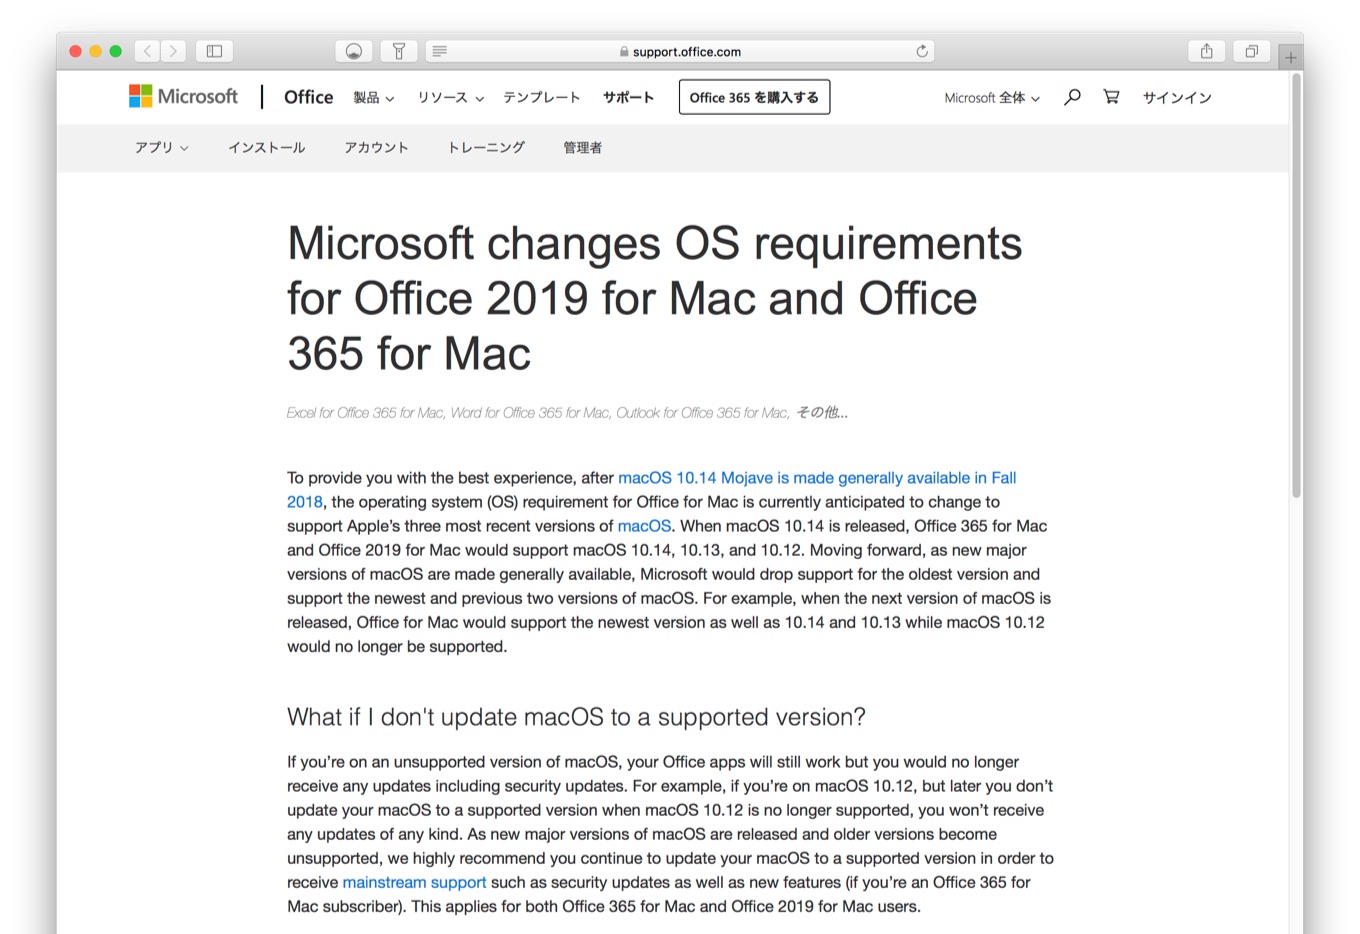 ms office 2019 for mac free download